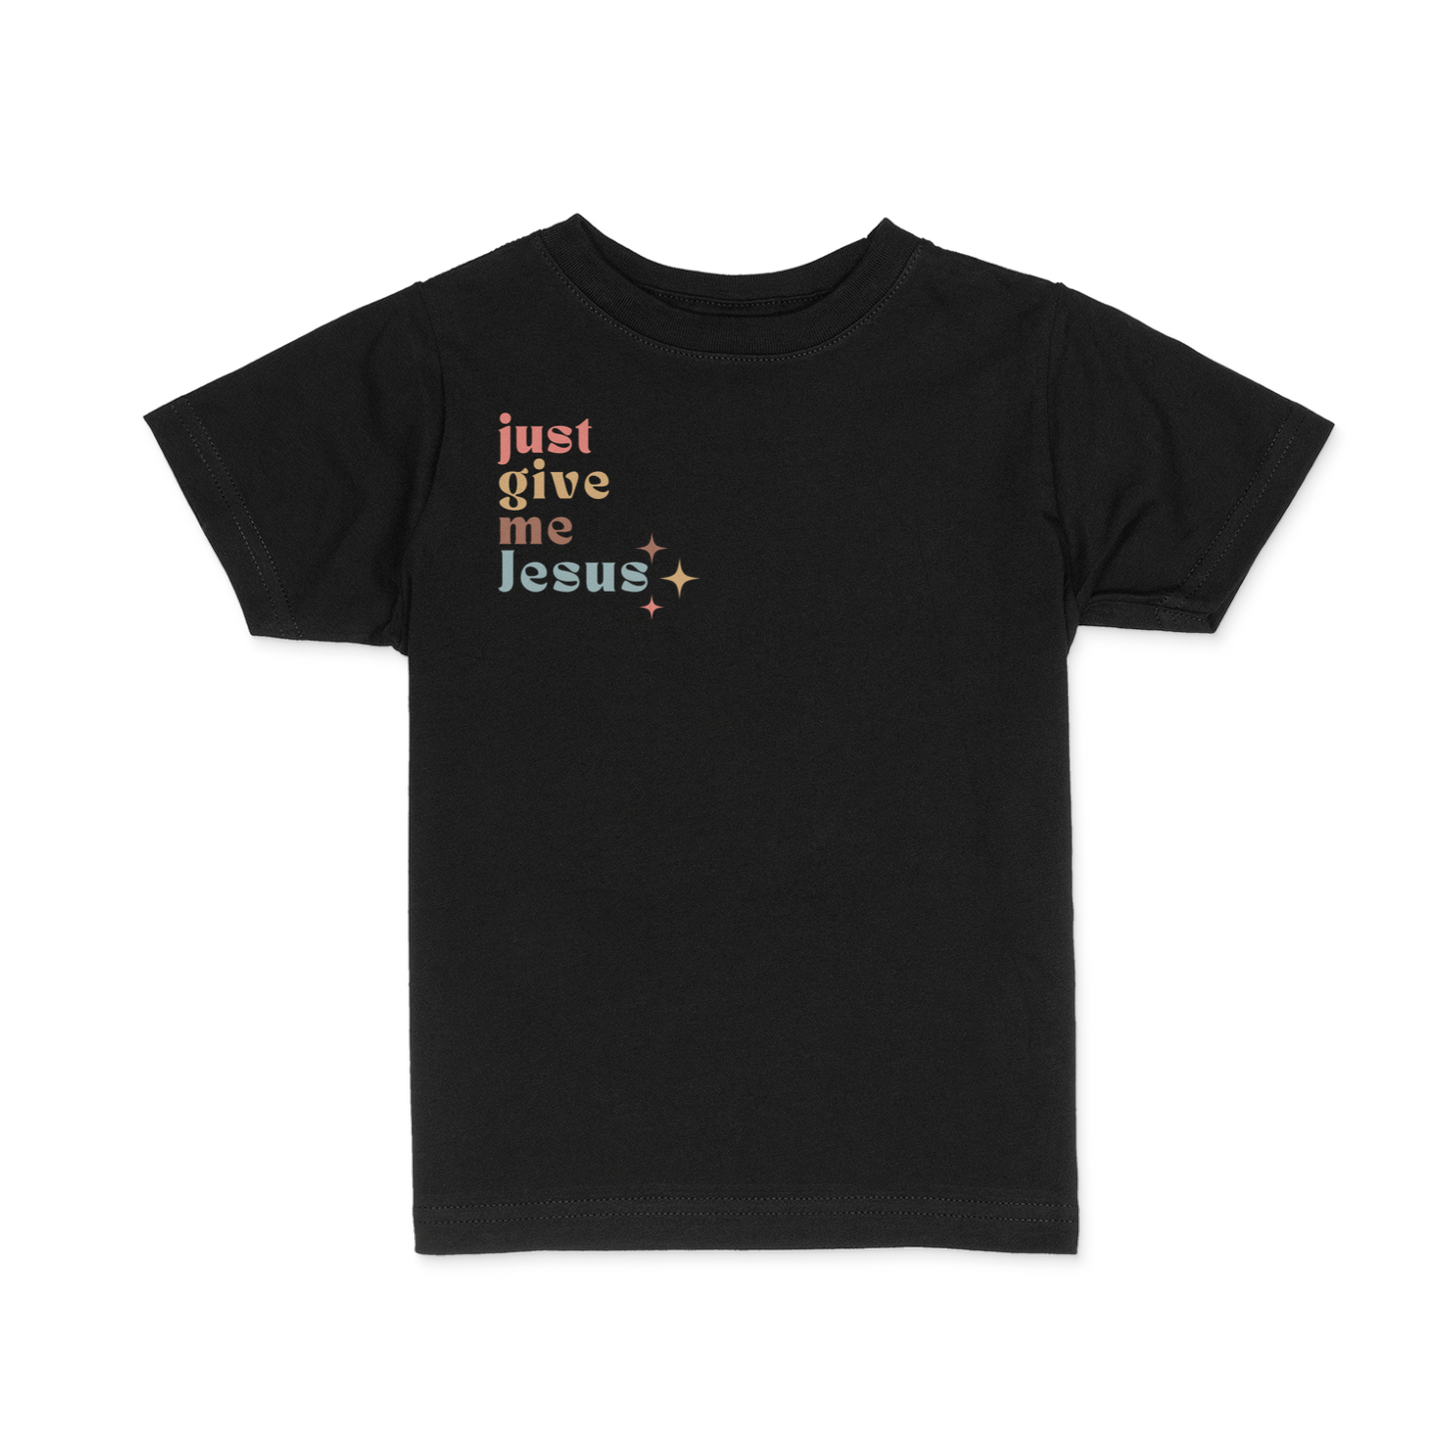 Give Me Jesus Adult T-Shirt in BLACK